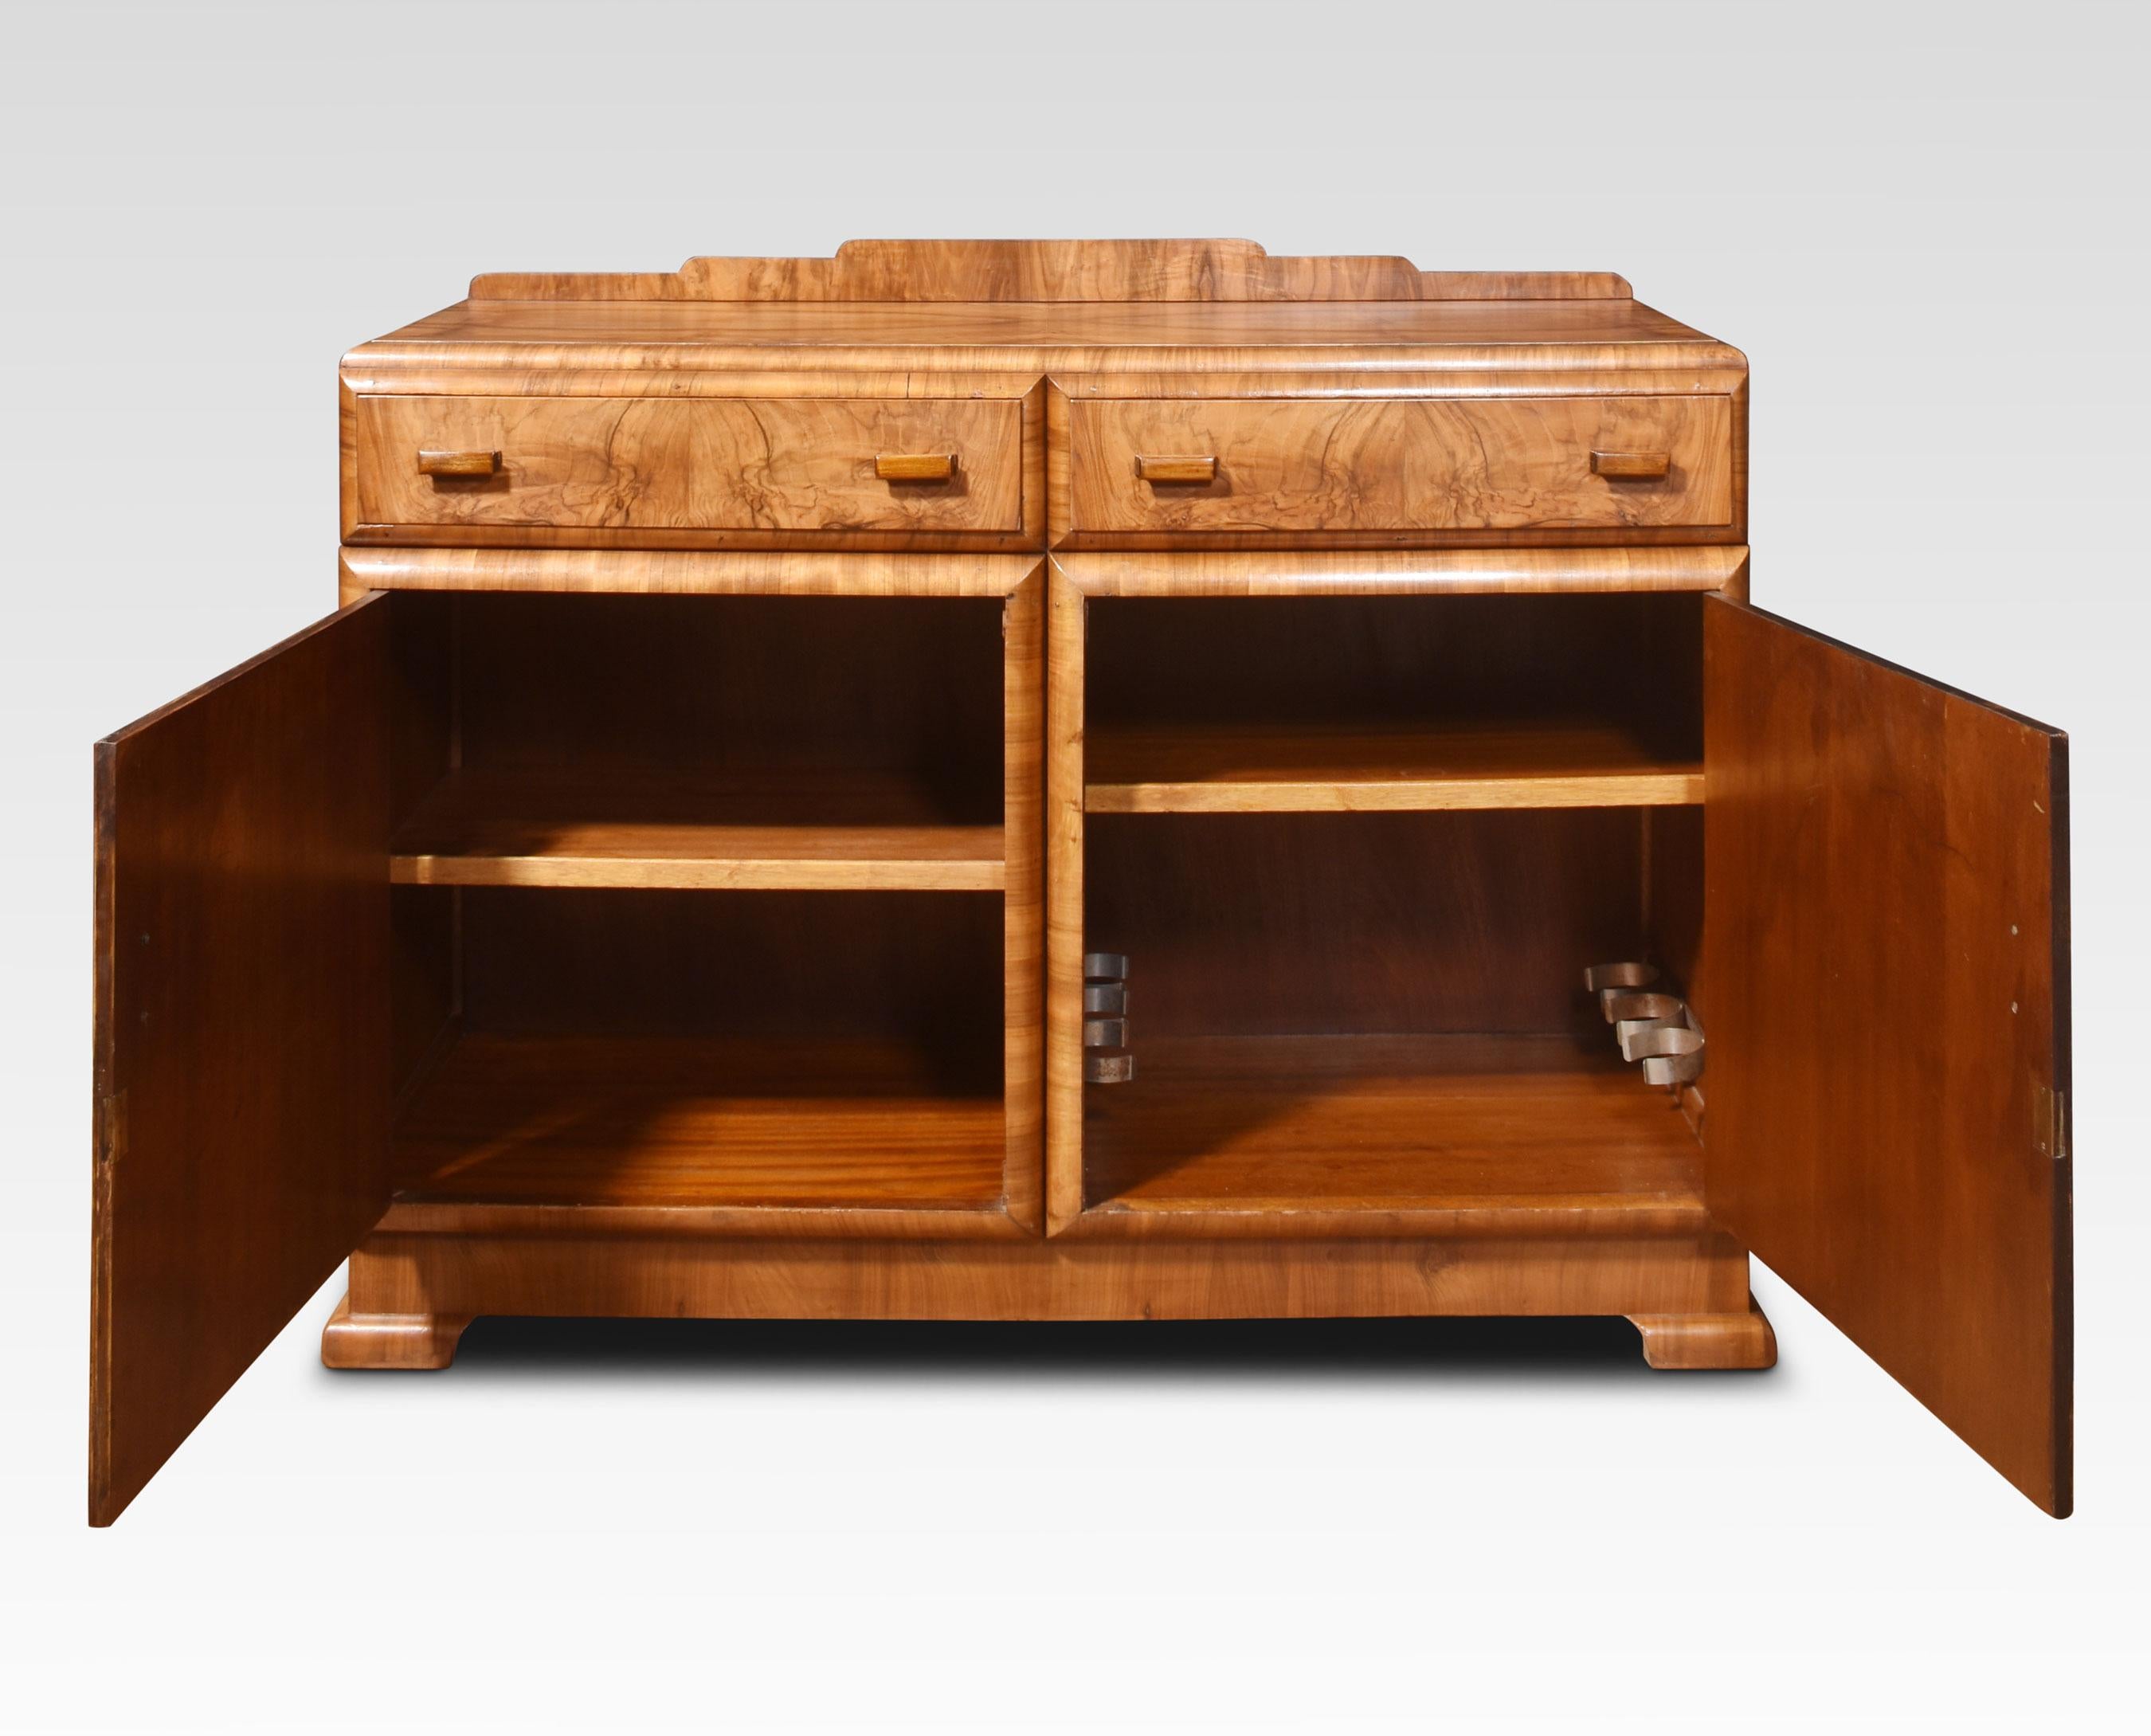 Art deco sideboard the raised gallery back to the large rectangular well figured walnut top. Above two long freeze drawers with stylised handles.Above two cupboard doors opening to reveal plenty of storage. All raised up on bracket